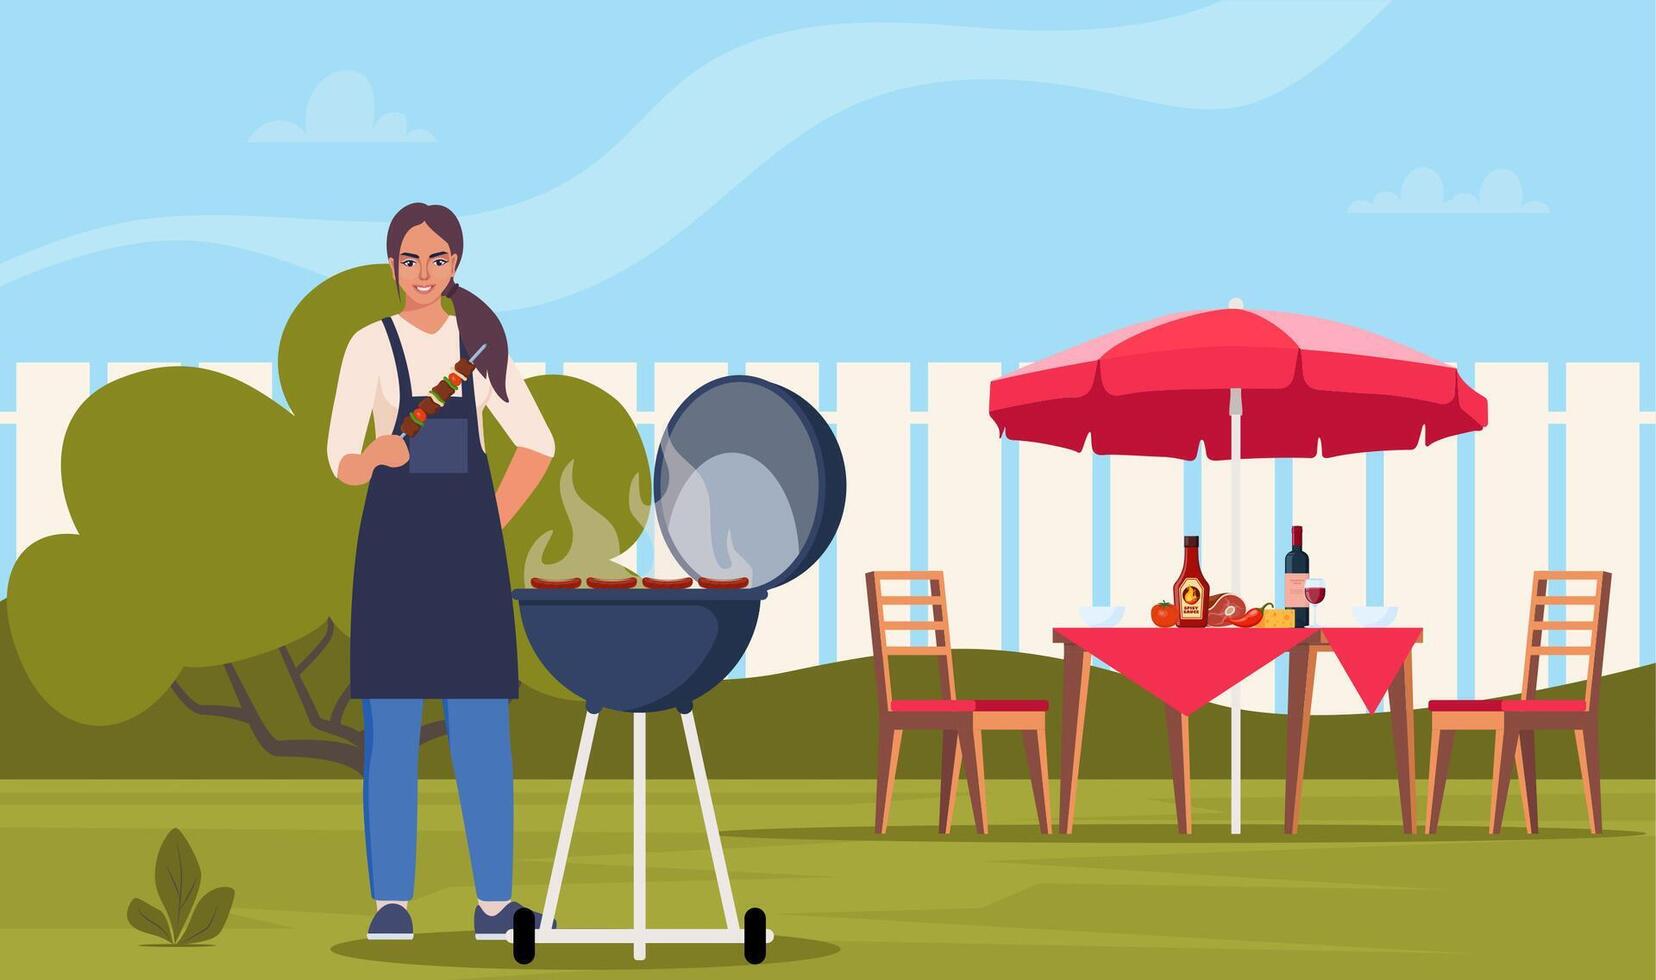 Woman cooking barbeque on backyard. BBQ party. Grilling meat and vegetables outside. Backyard picnic on a weekend. Vector illustration.